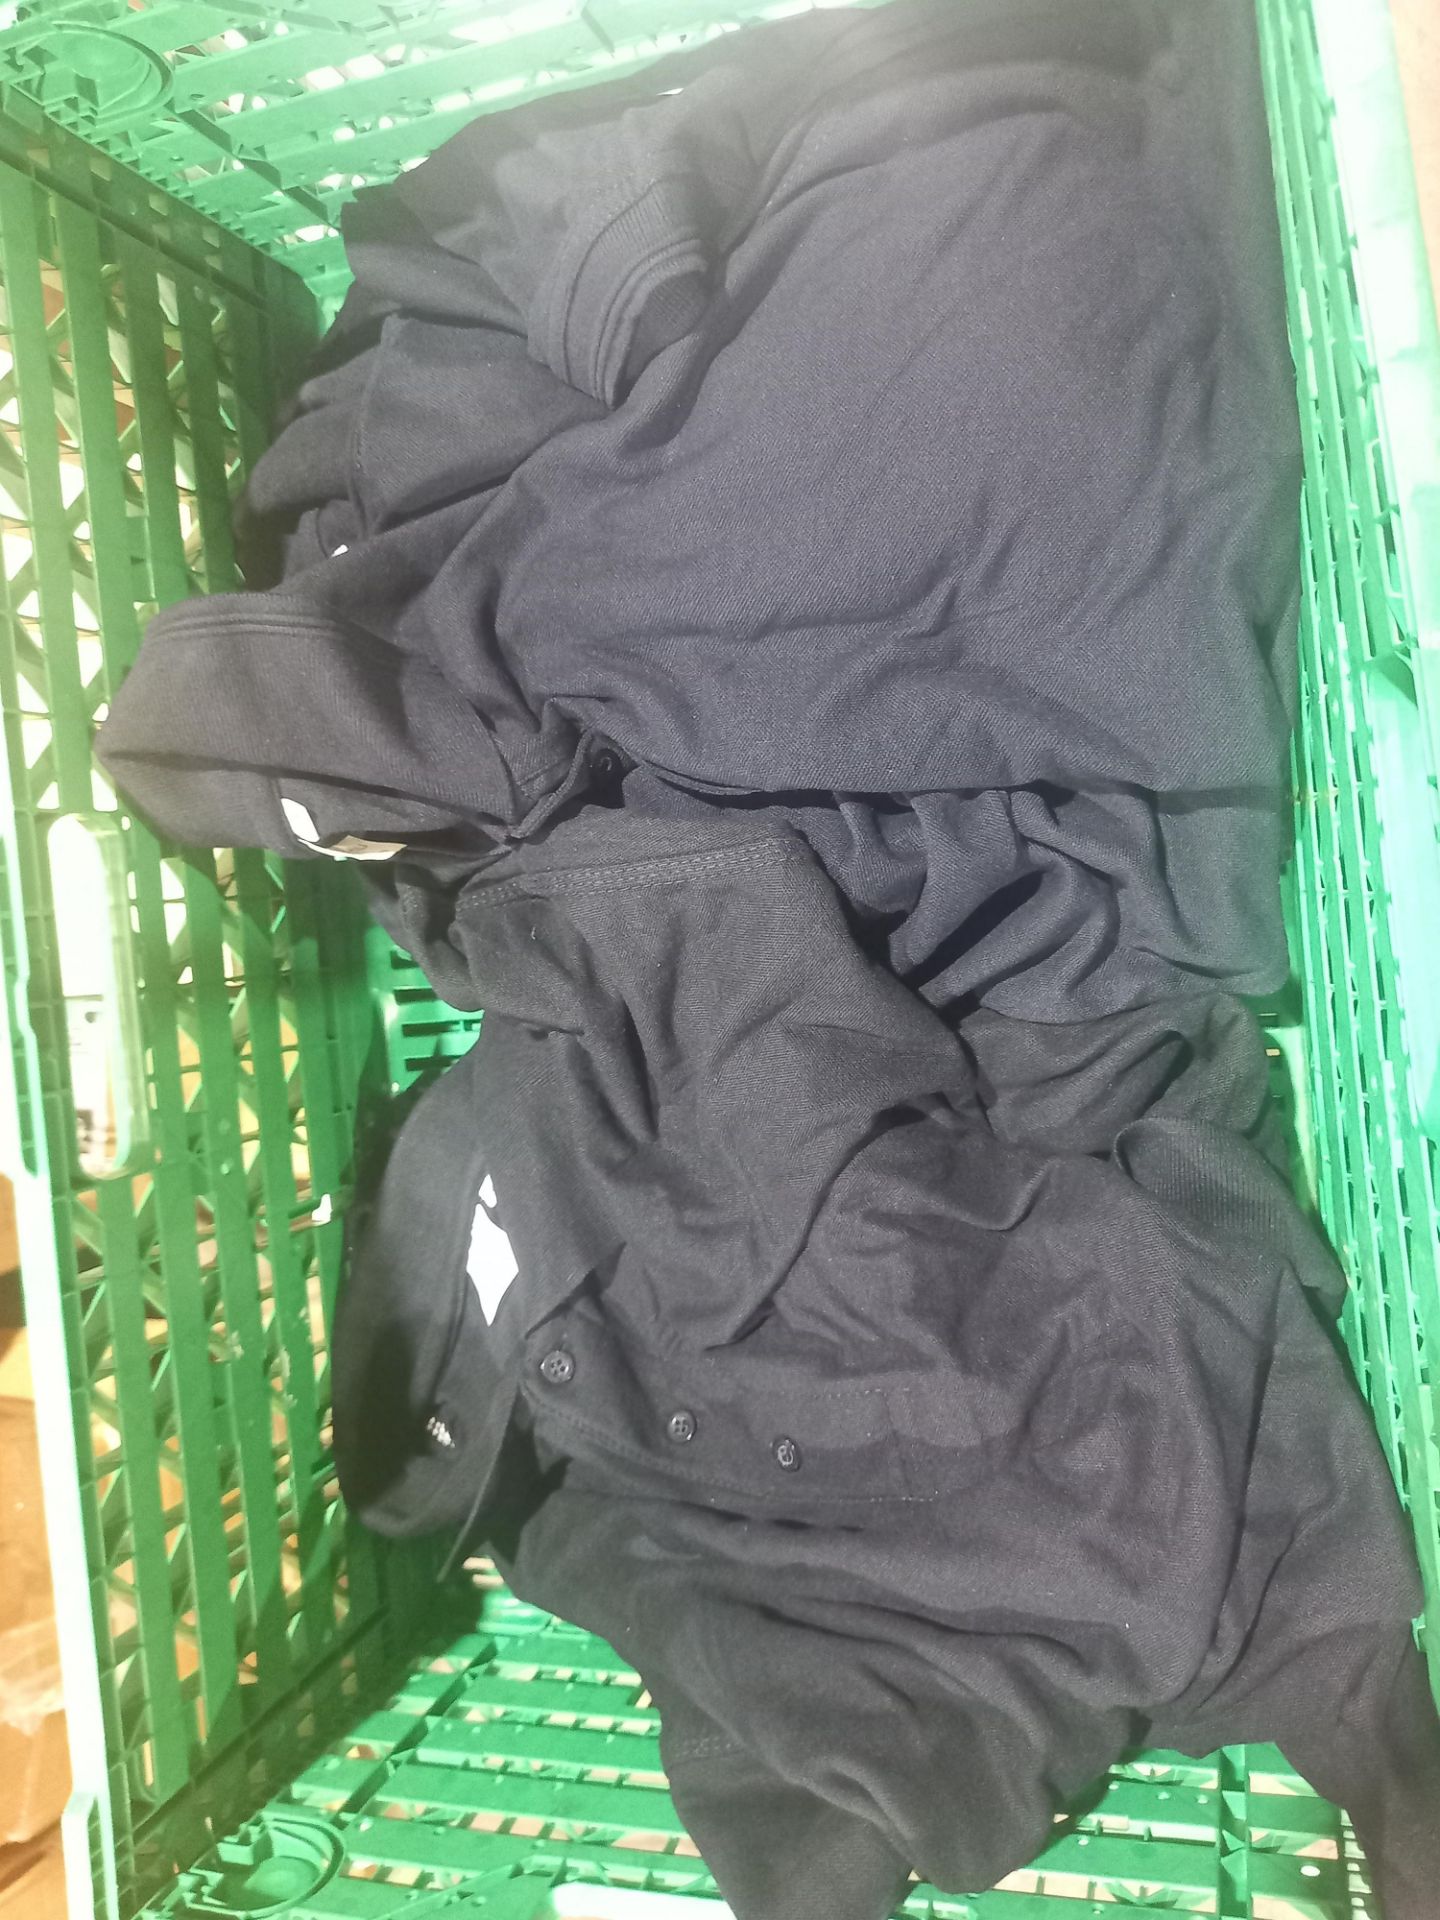 Mixed Lot of Workwear - Trousers, Shirts, Hats, Jackets (Sizes S-XXXL) - Makes incl. Portwest, Regat - Image 7 of 20